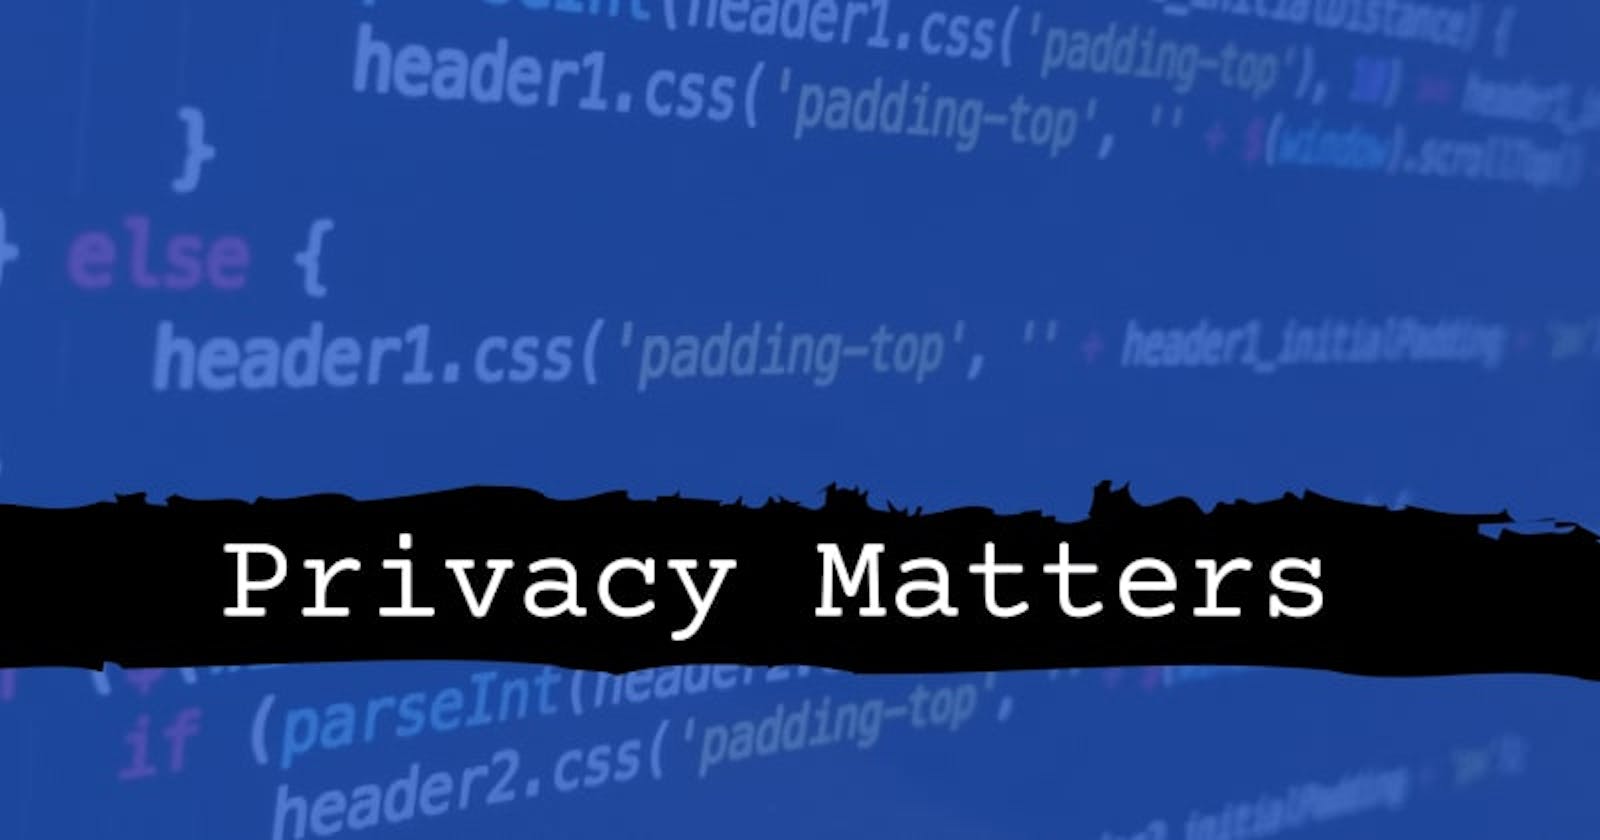 The Role of Open Source Projects in the Privacy Wars